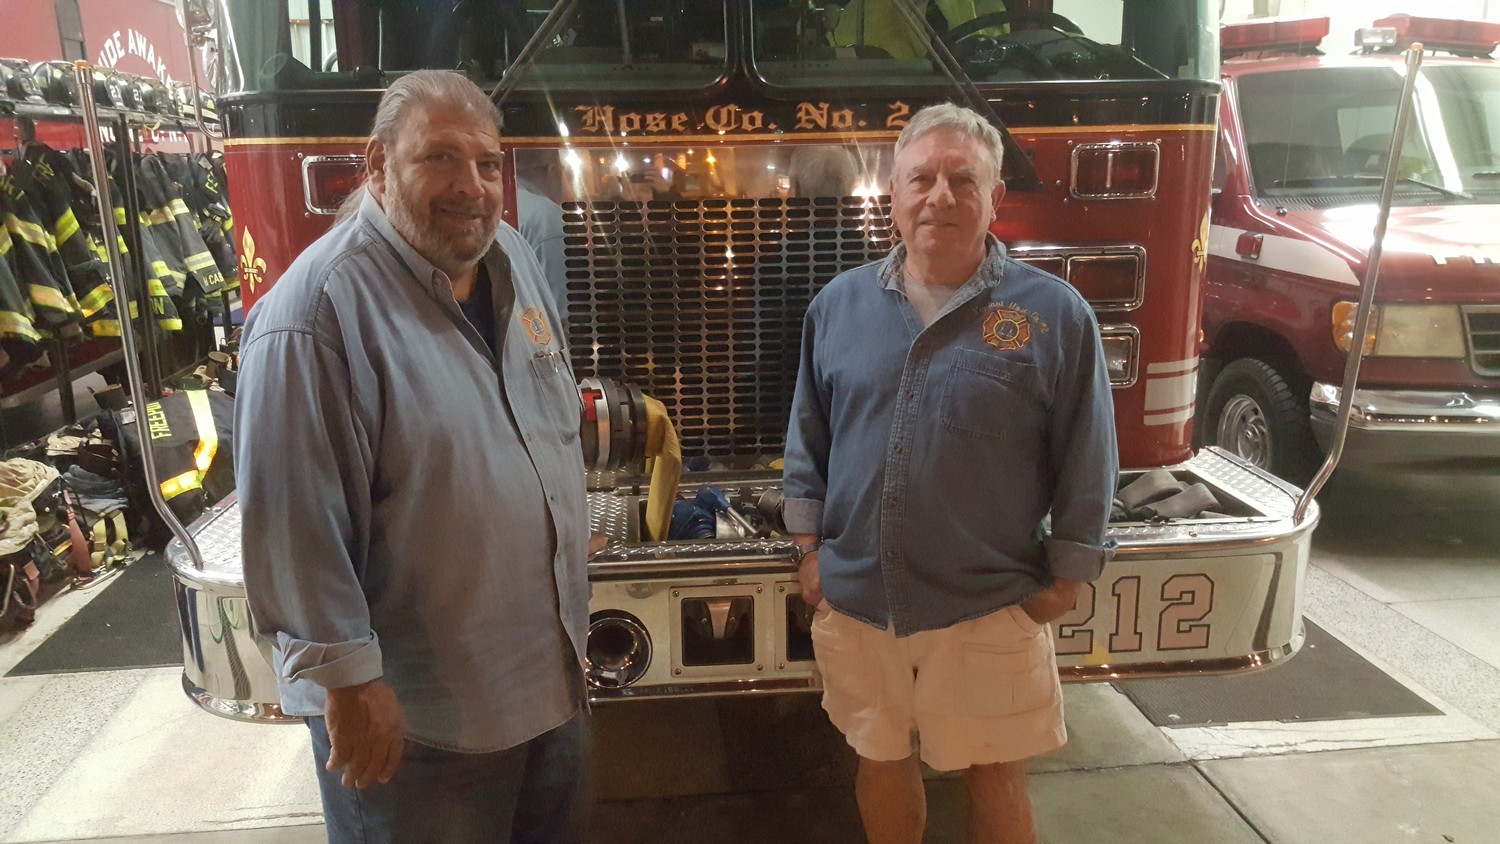 Freeport firefighters Anthony Basile, left, and Edward Martin joined Hose Co. No. 2 in 1968.